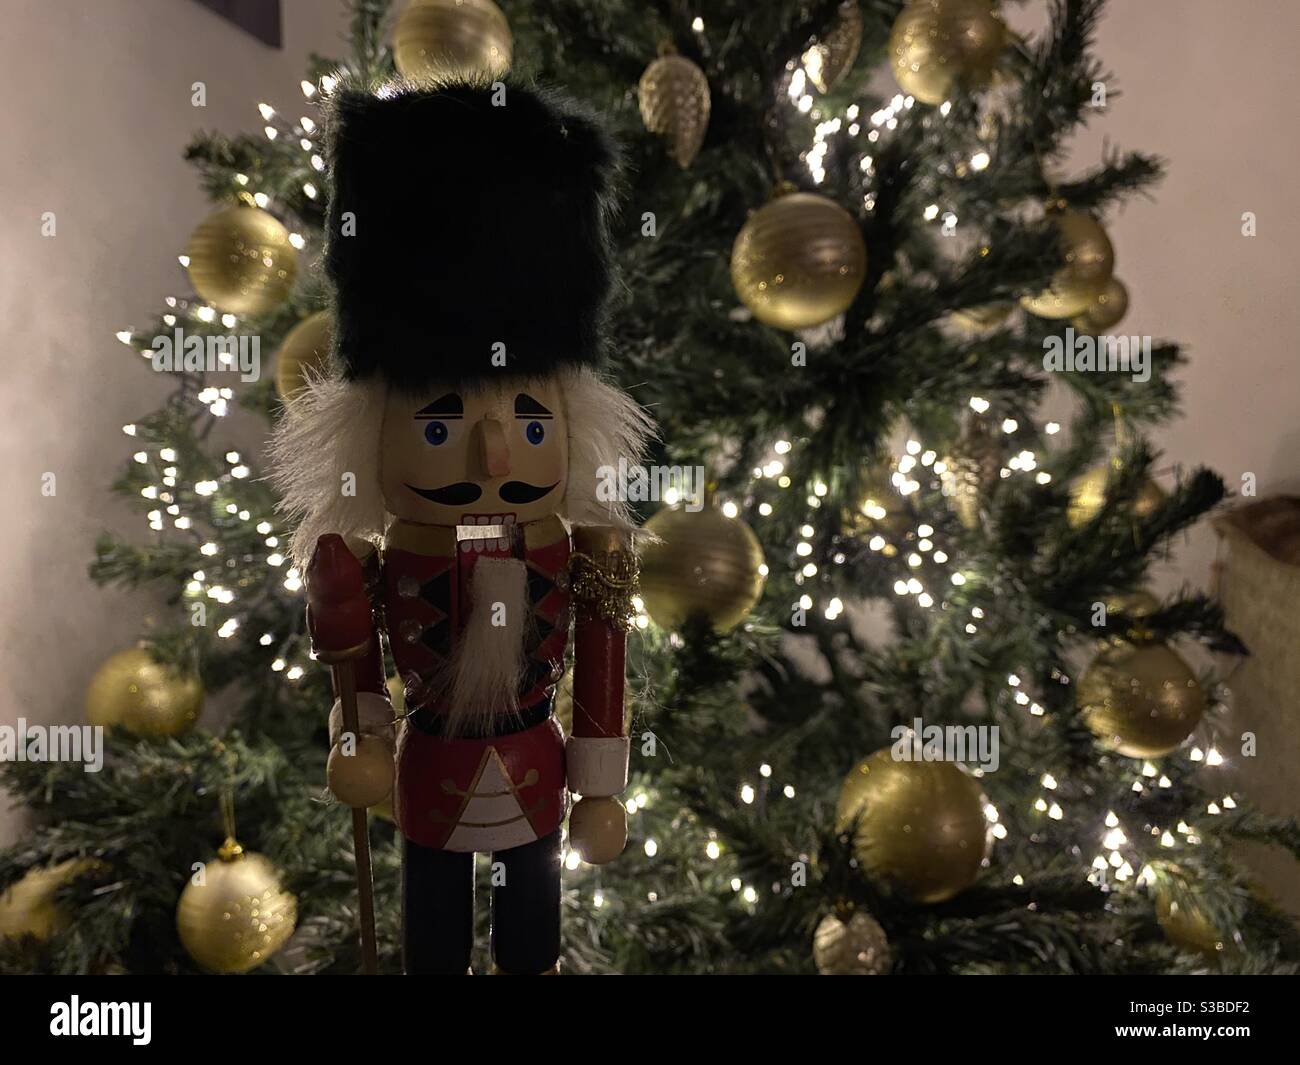 Traditional wooden toy standing in front of the Christmas tree. Stock Photo